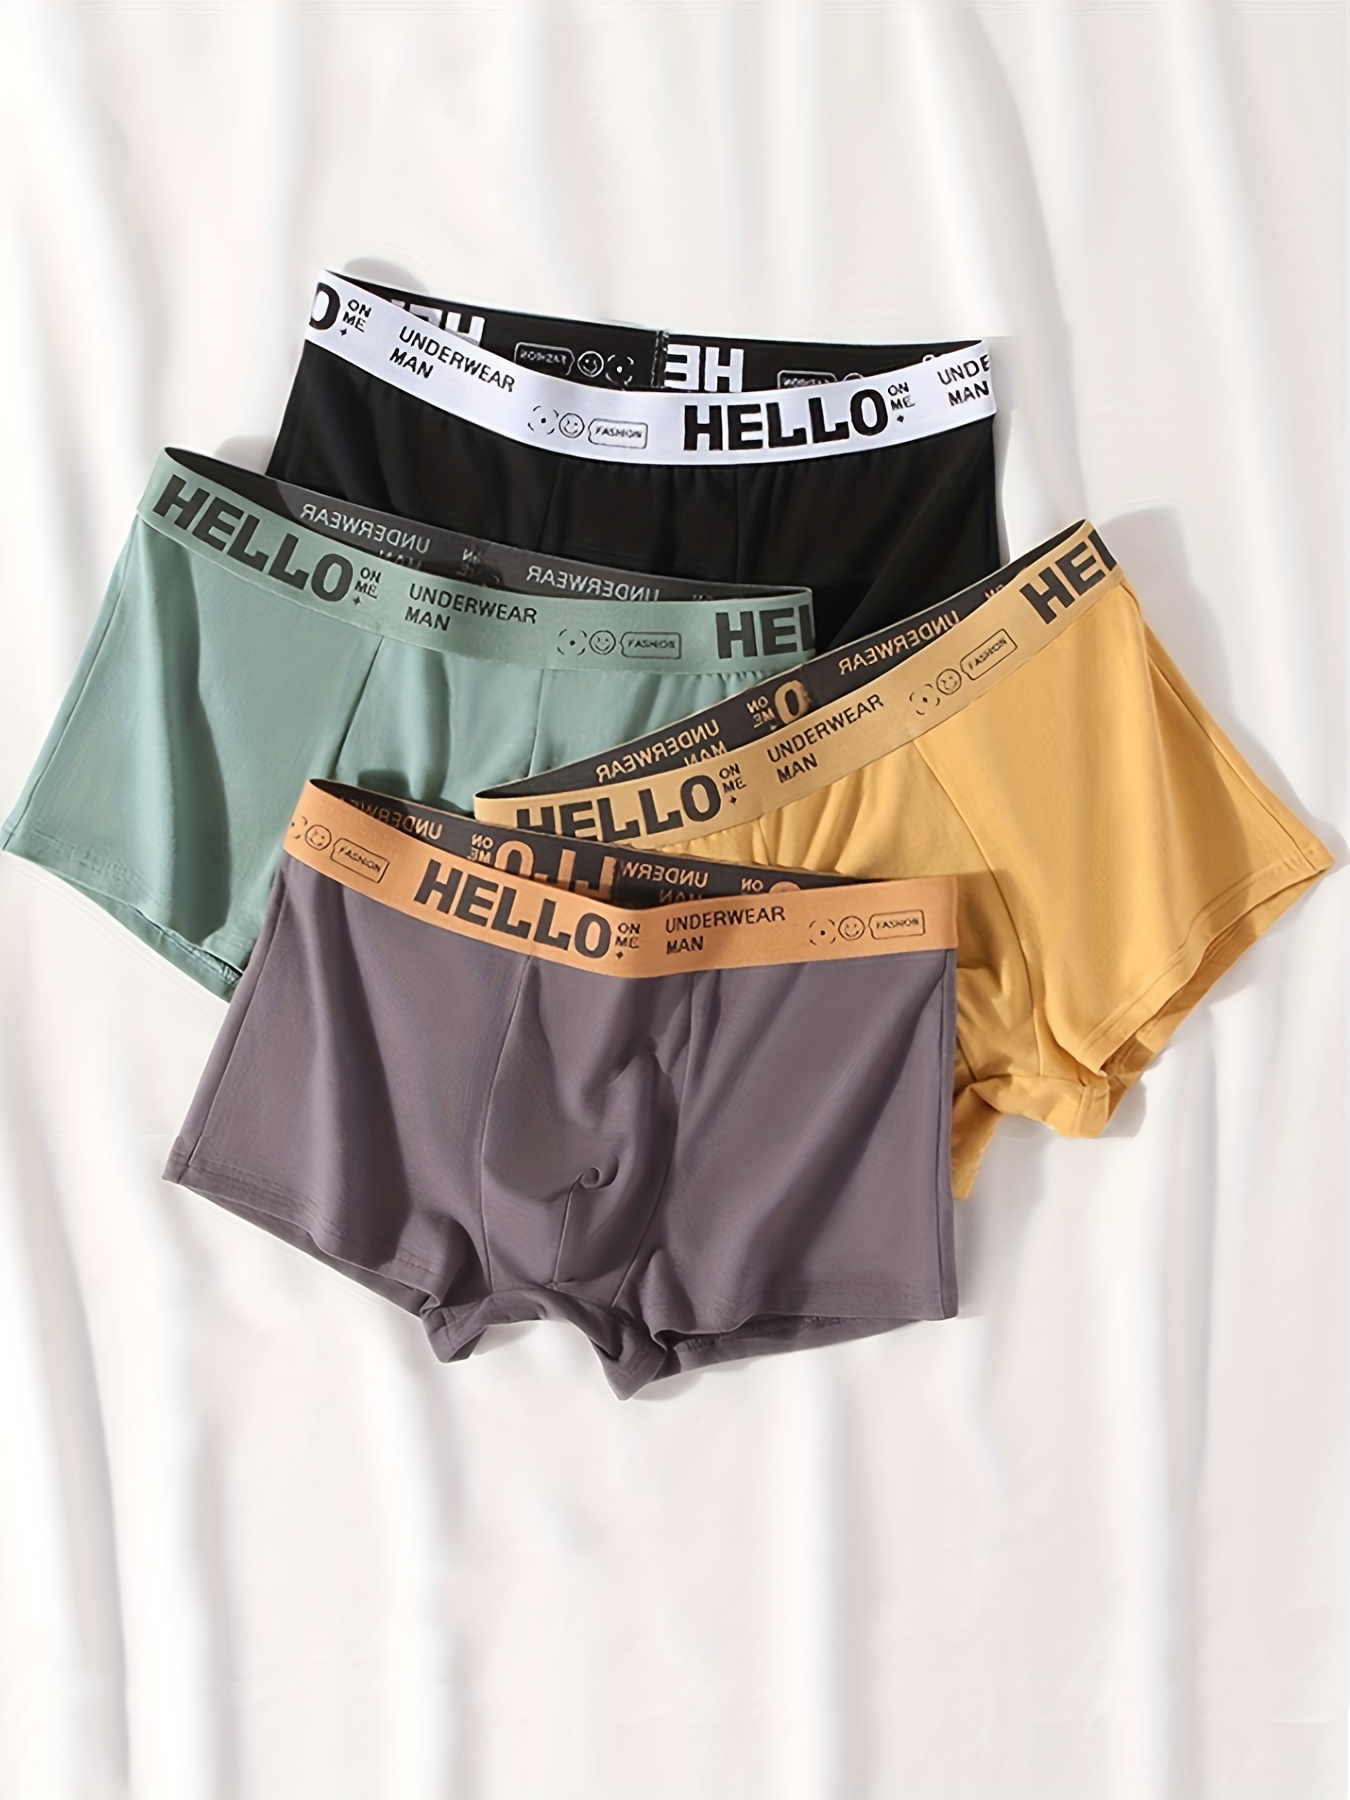 Shinesty Underwear Subscription Review + Coupon - Women - Hello